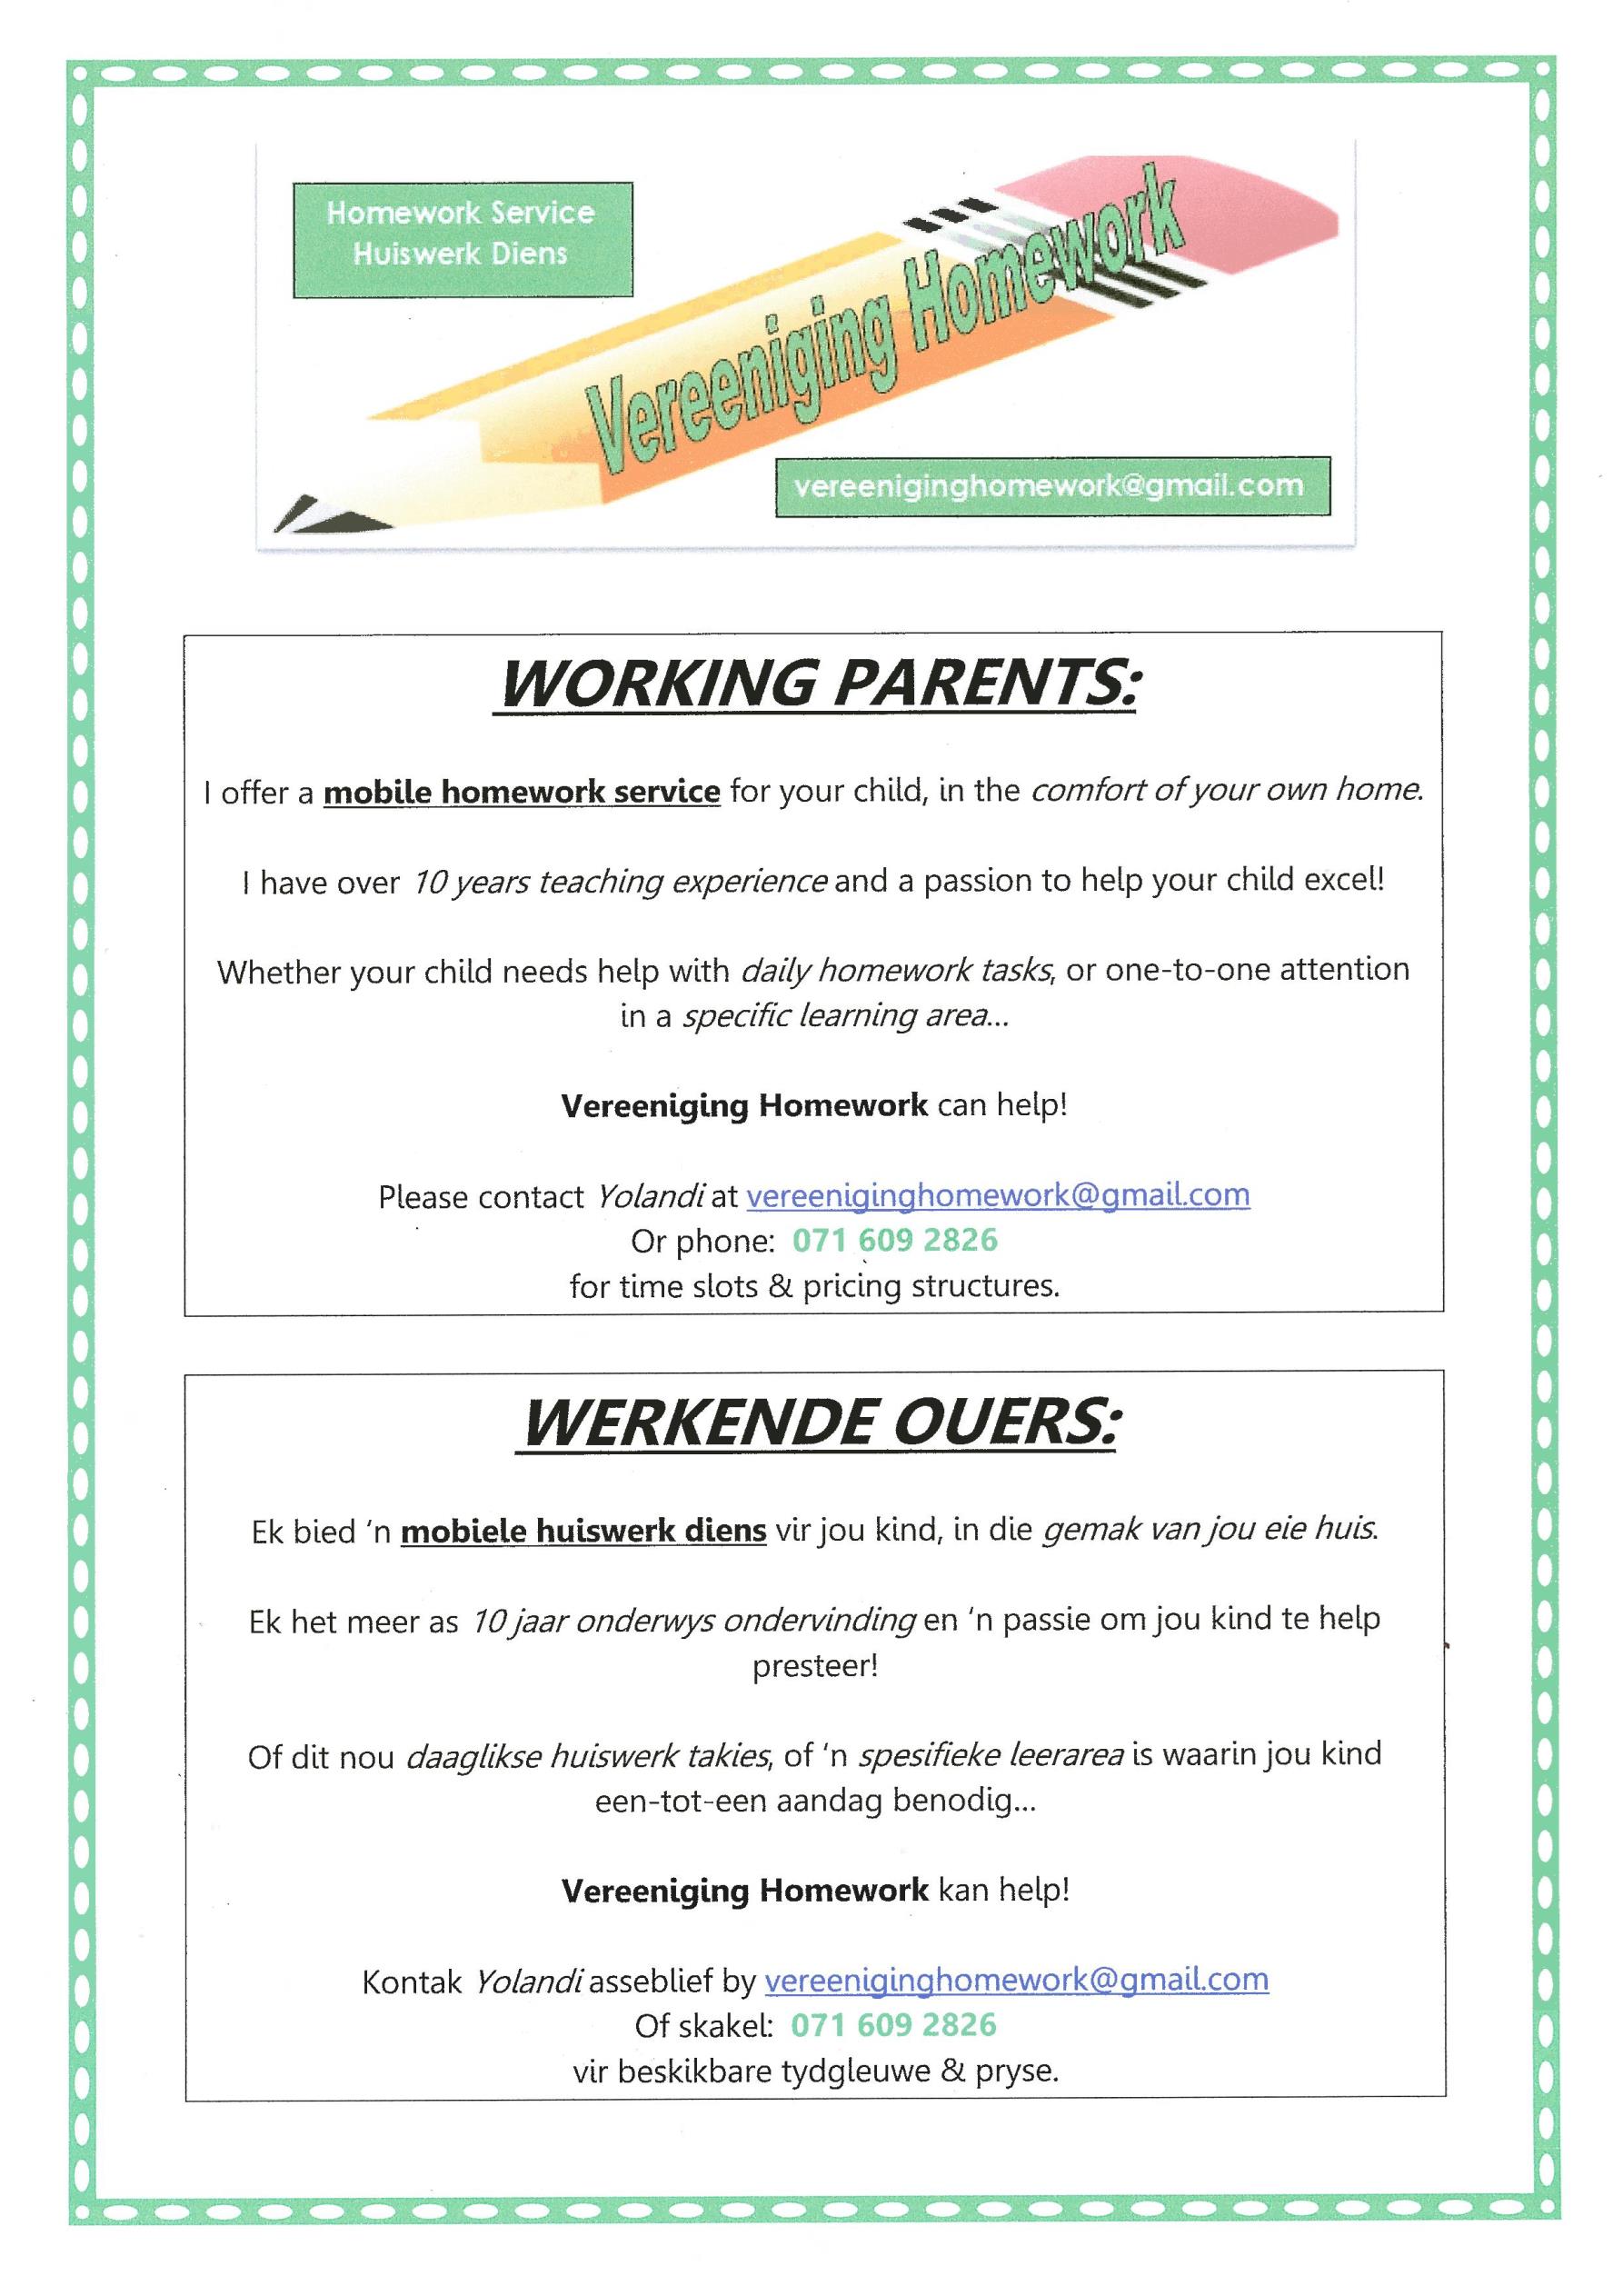 Huiswerk hulp Home work assistance-page-001